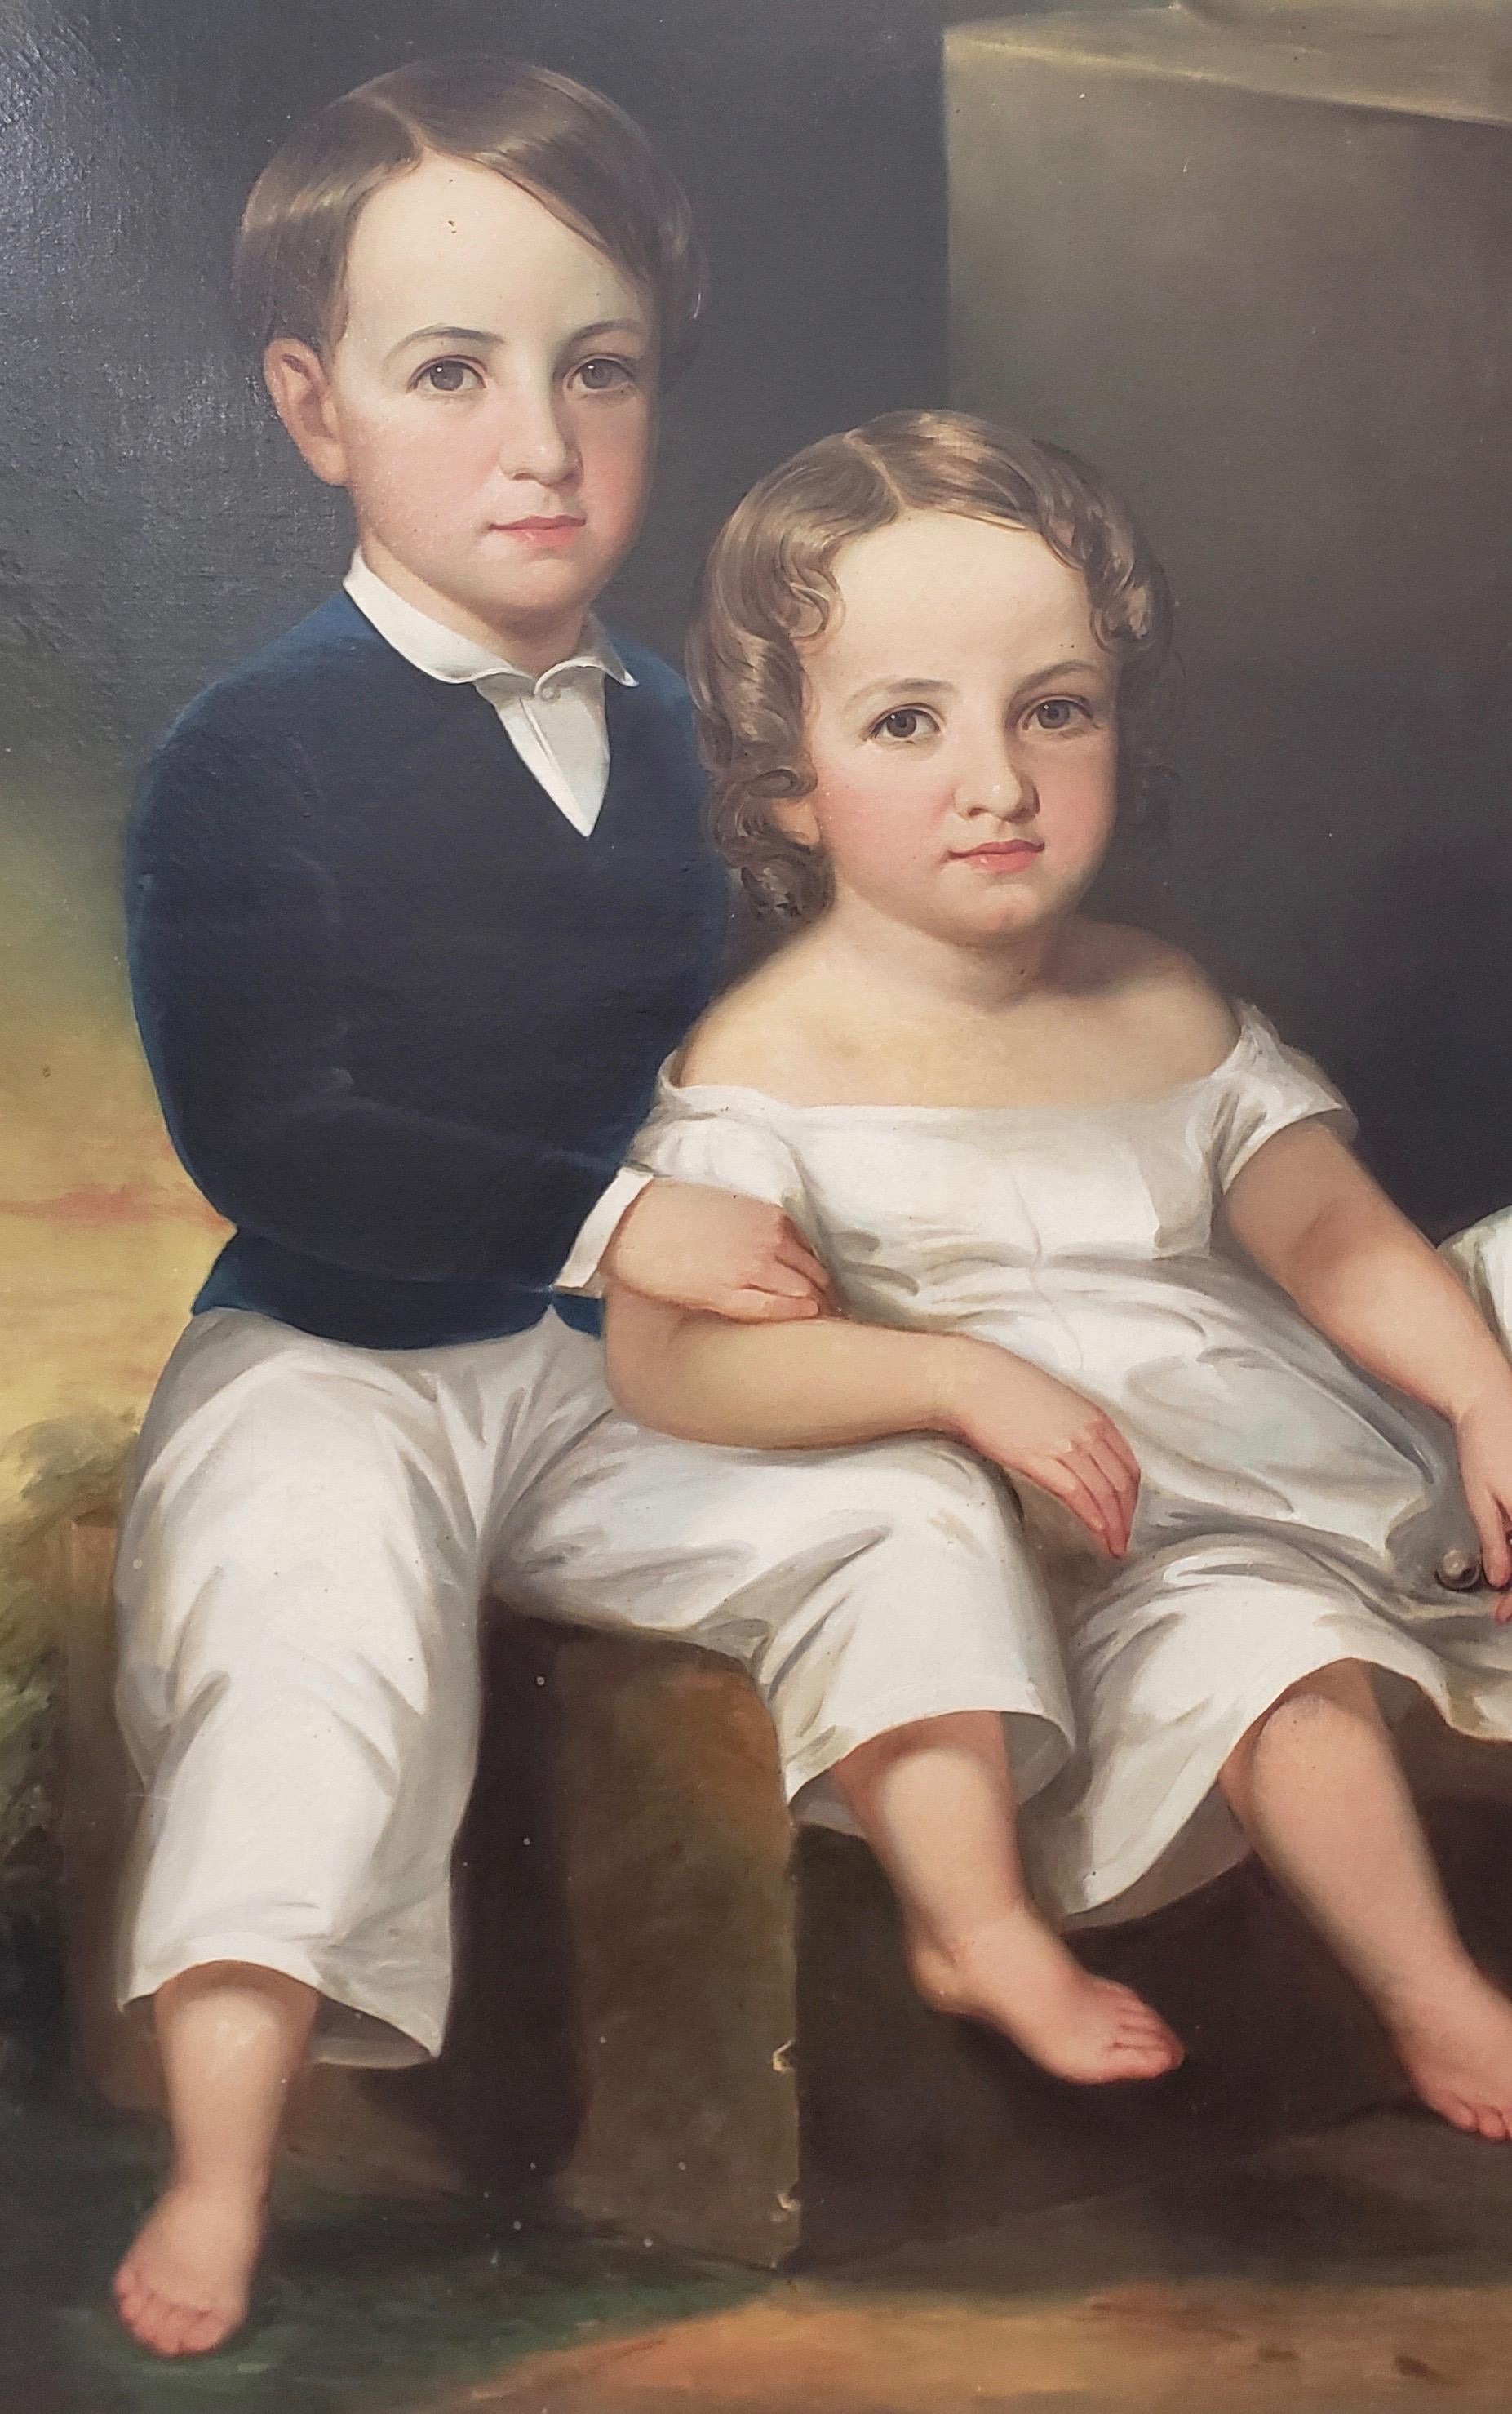 Monumental Mid-19th Century Oil Portrait of Two Siblings - Gray Figurative Painting by Unknown